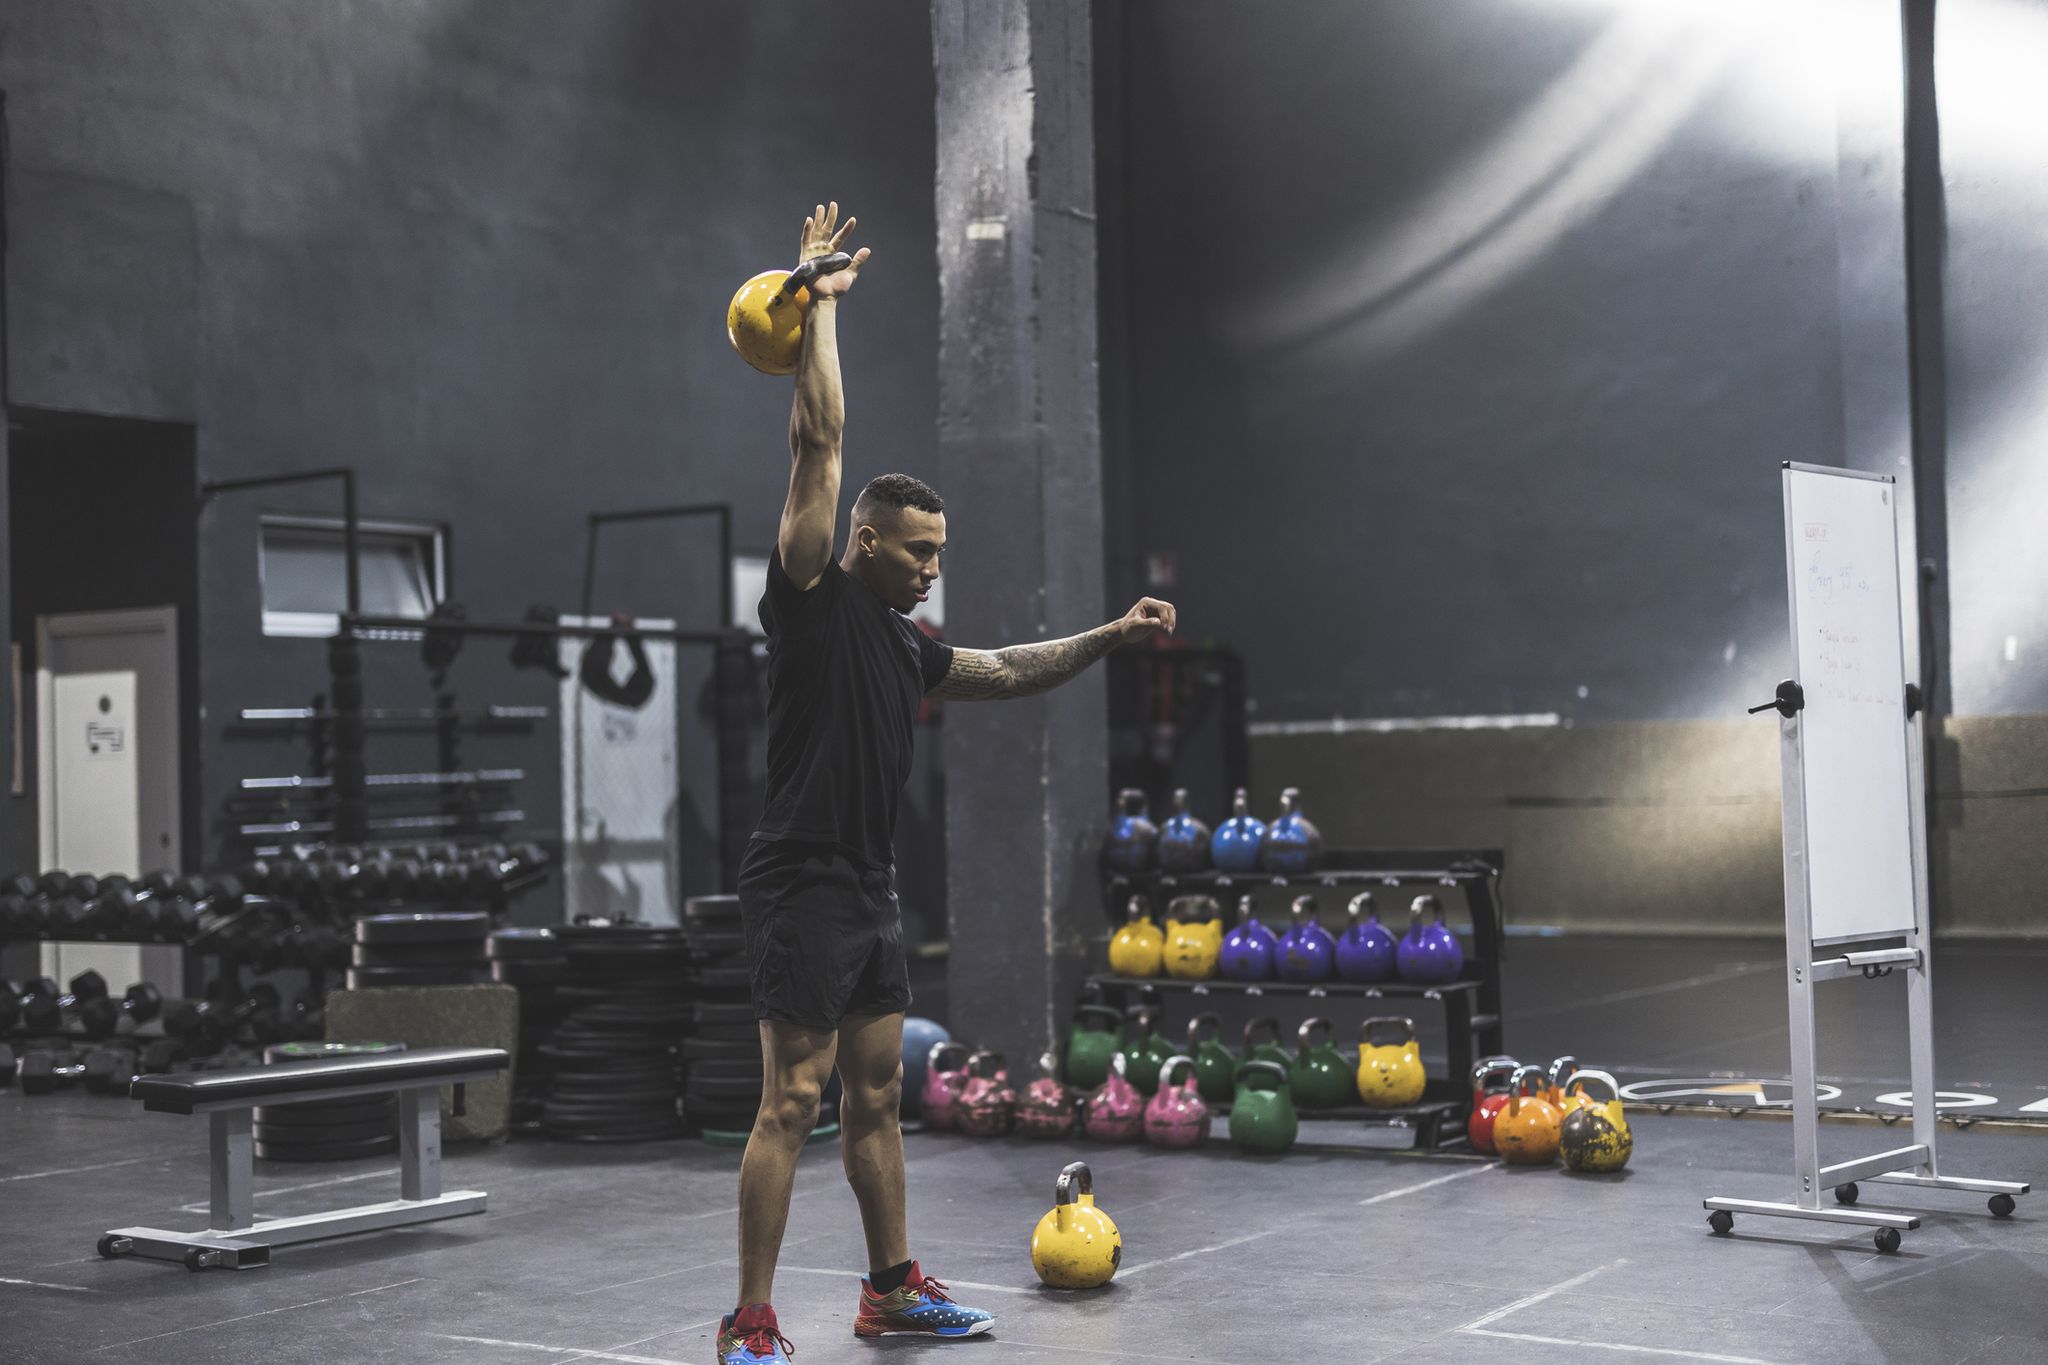 25 of the Best Kettlebell Exercises & Workouts to Build Muscle